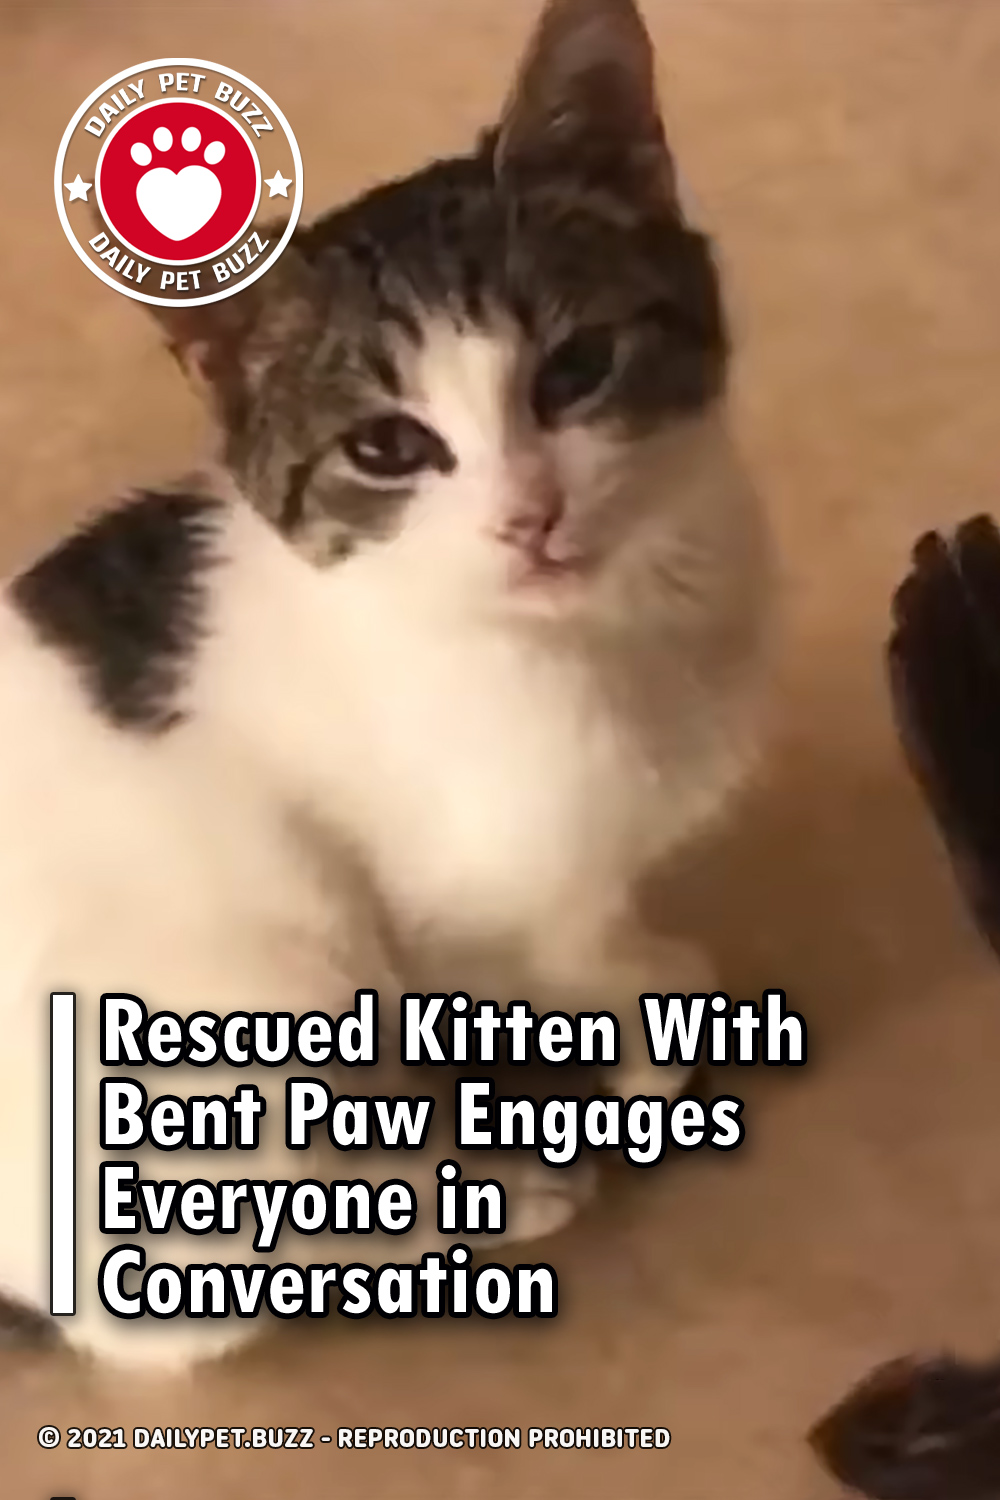 Rescued Kitten With Bent Paw Engages Everyone in Conversation